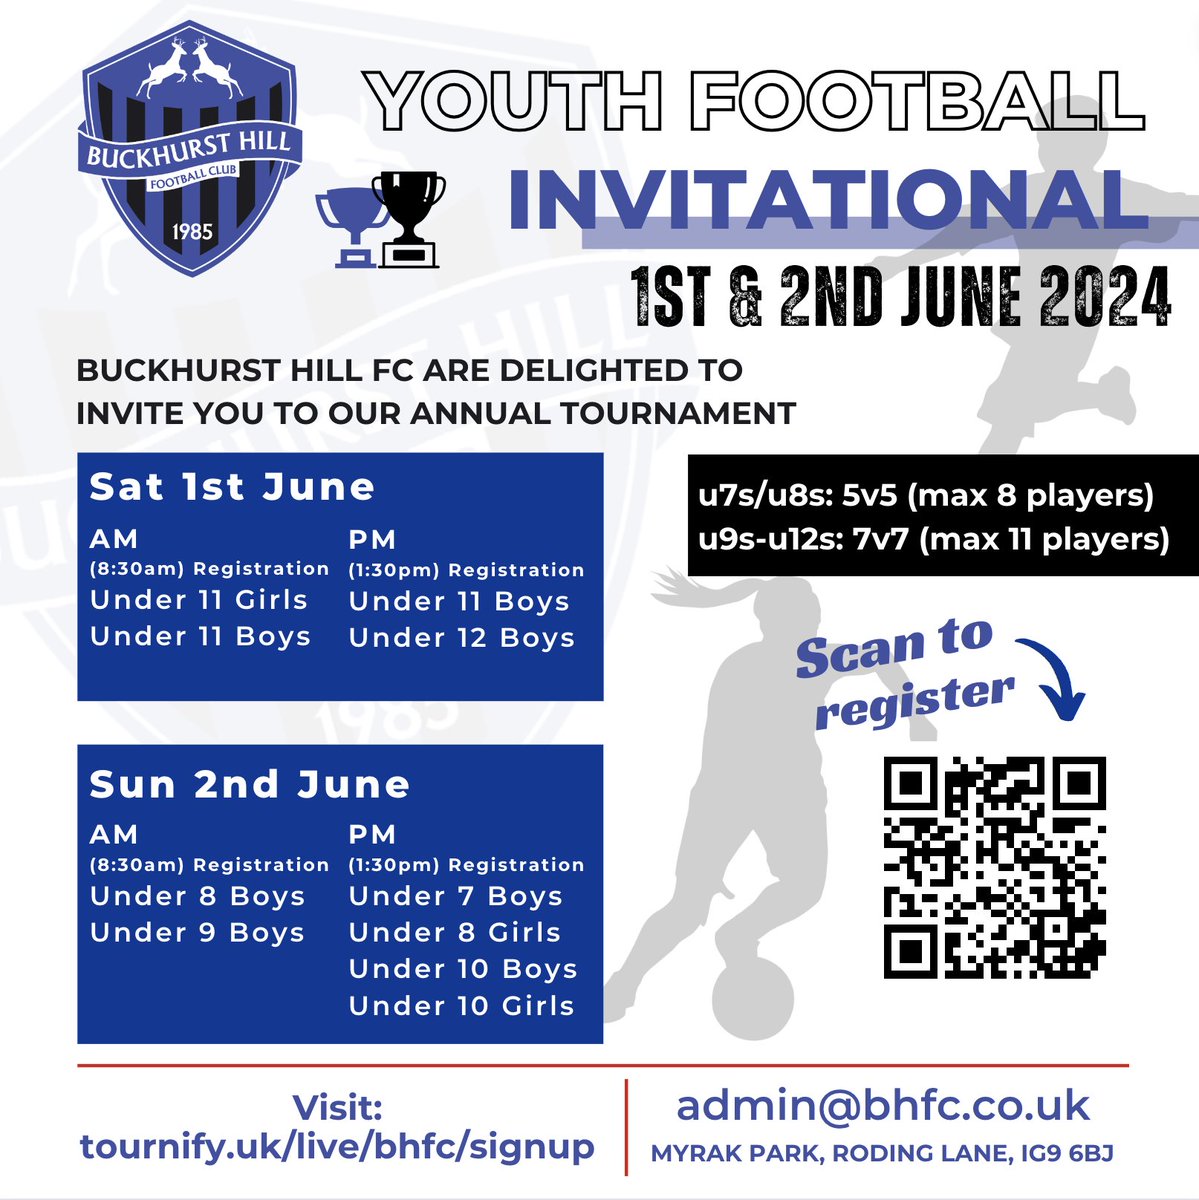 🚨ONLY FEW SPACES LEFT IN OUR TOURNAMENT!! SIGN UP NOW > tournify.uk/live/bhfc u7 boys - 5 spaces u8 boys - 10 spaces u8 girls - 2 spaces u9 boys - FULL ❌ u10s boys - FULL ❌ u10 girls - 5 spaces u11 boys - 2 spaces u11 girls - FULL ❌ u12 boys - 6 spaces